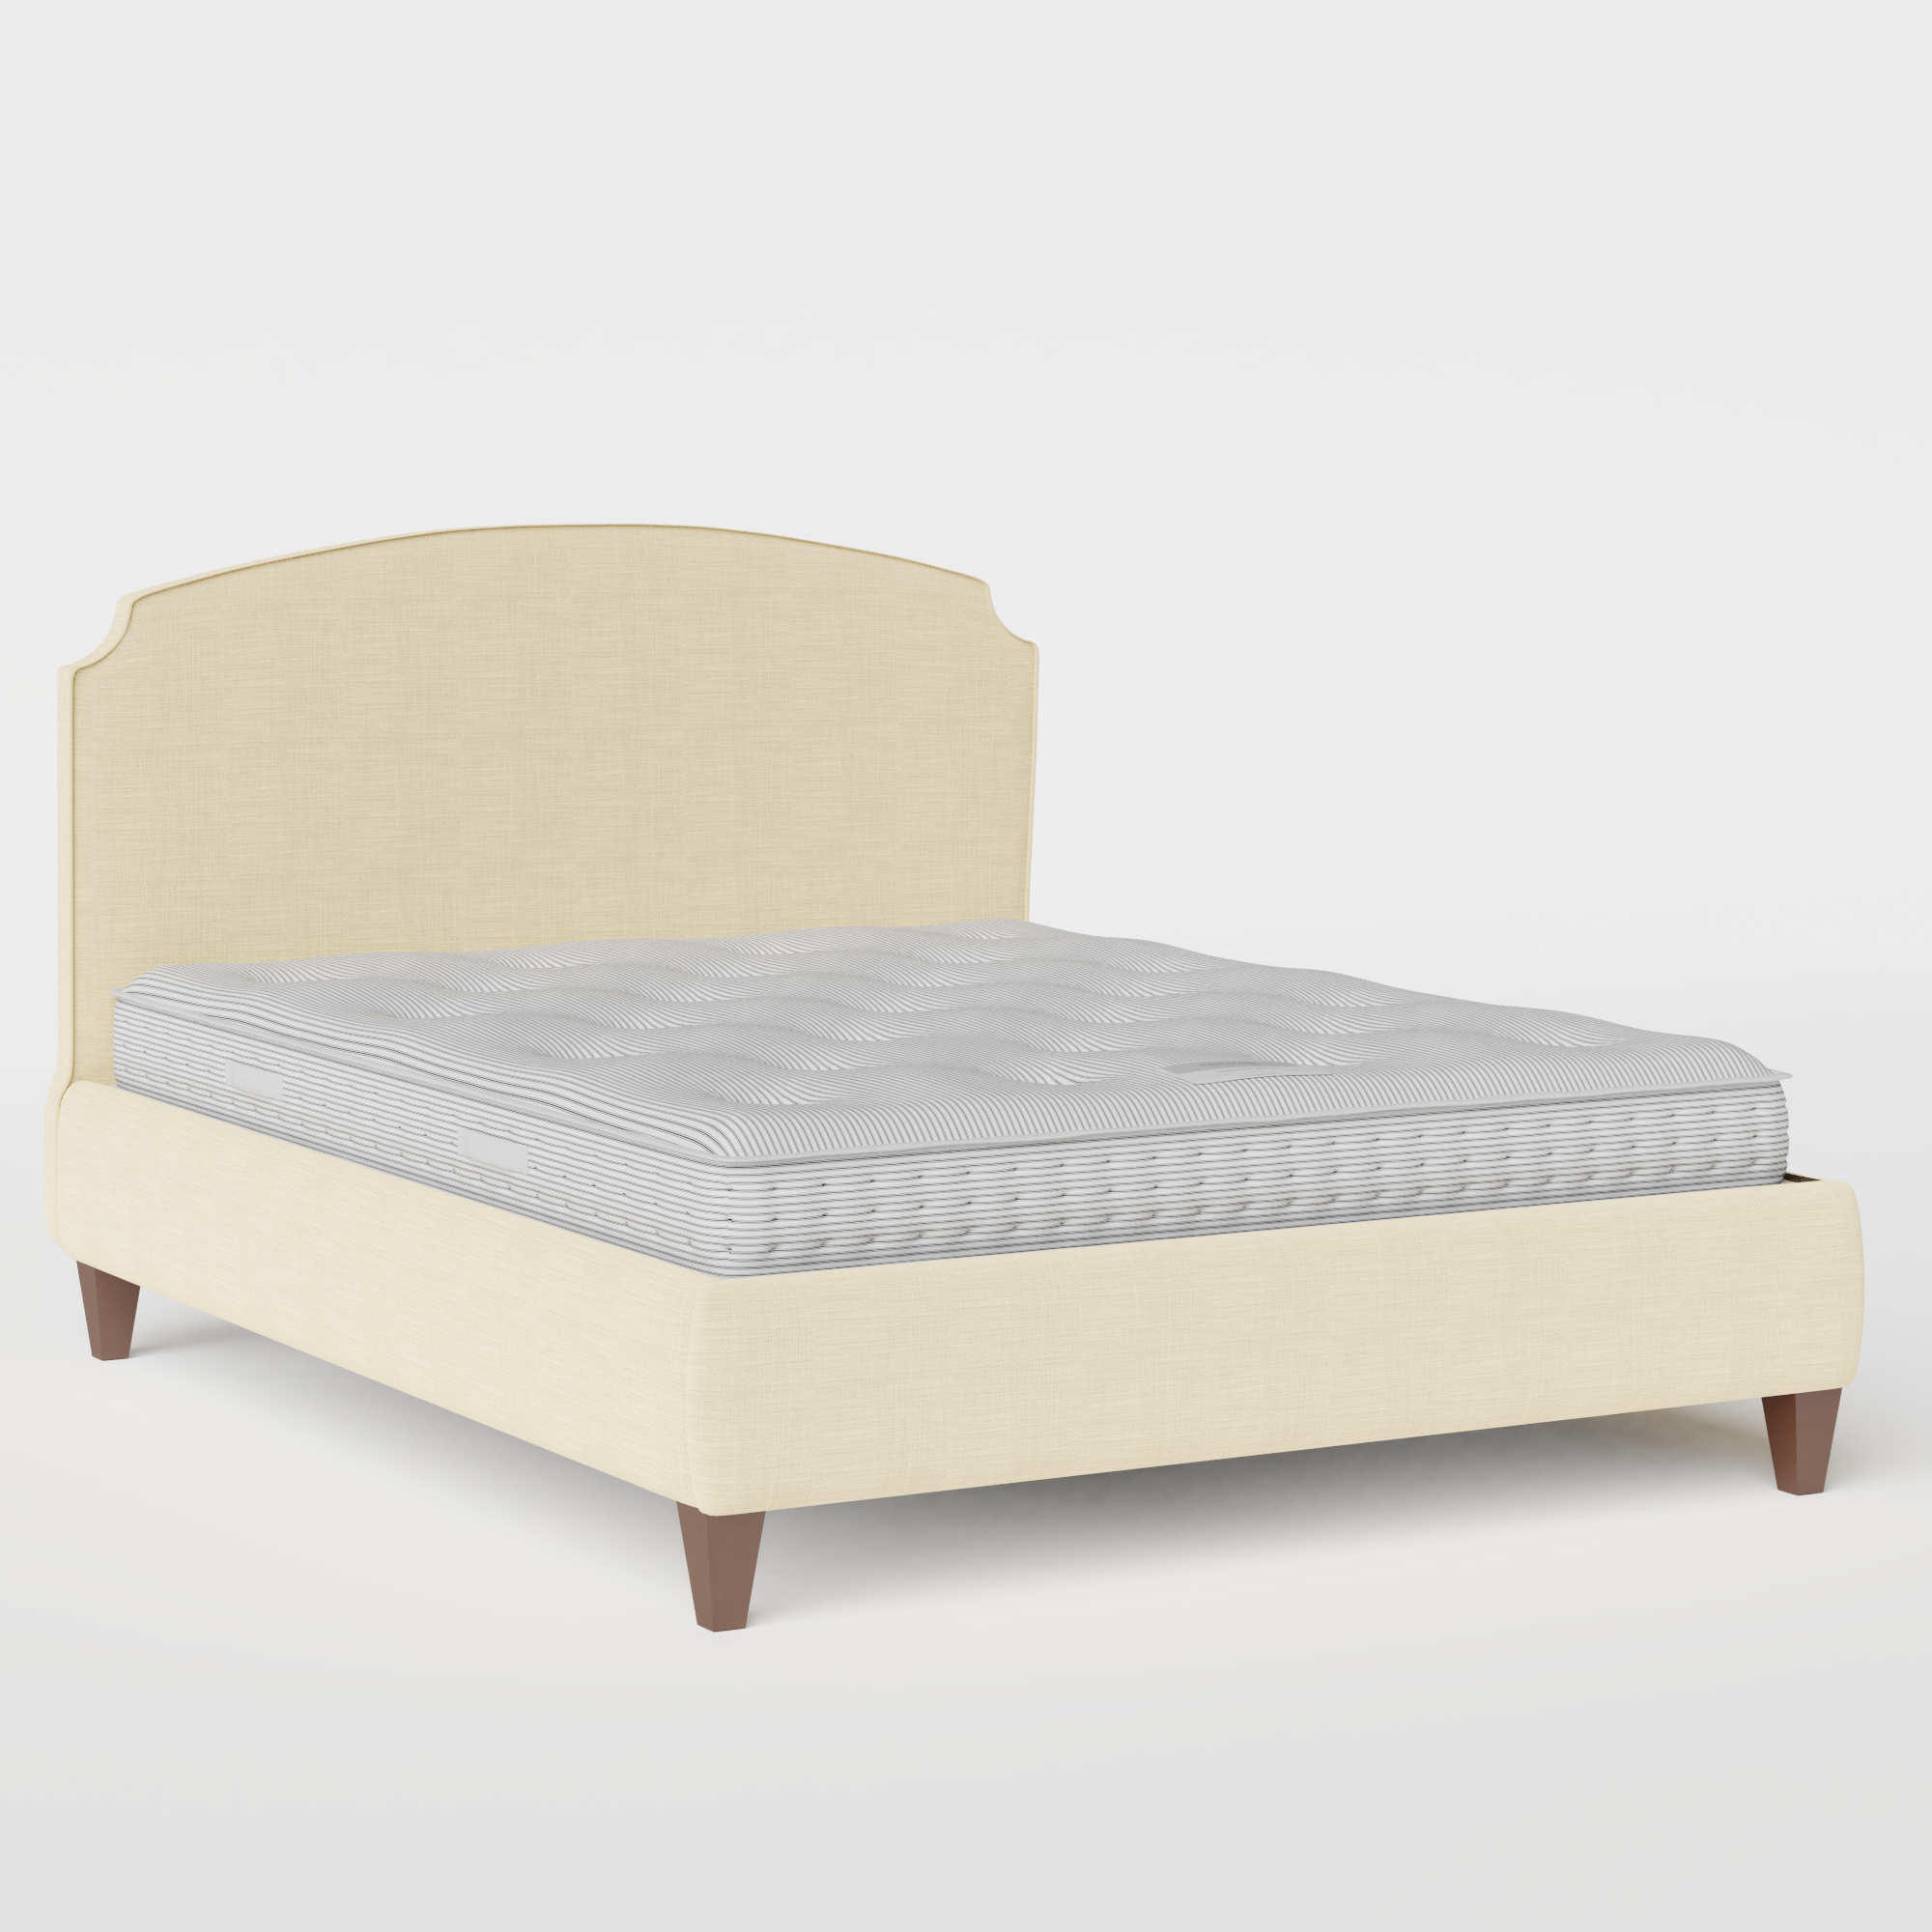 Lide with Piping stoffen bed in natural